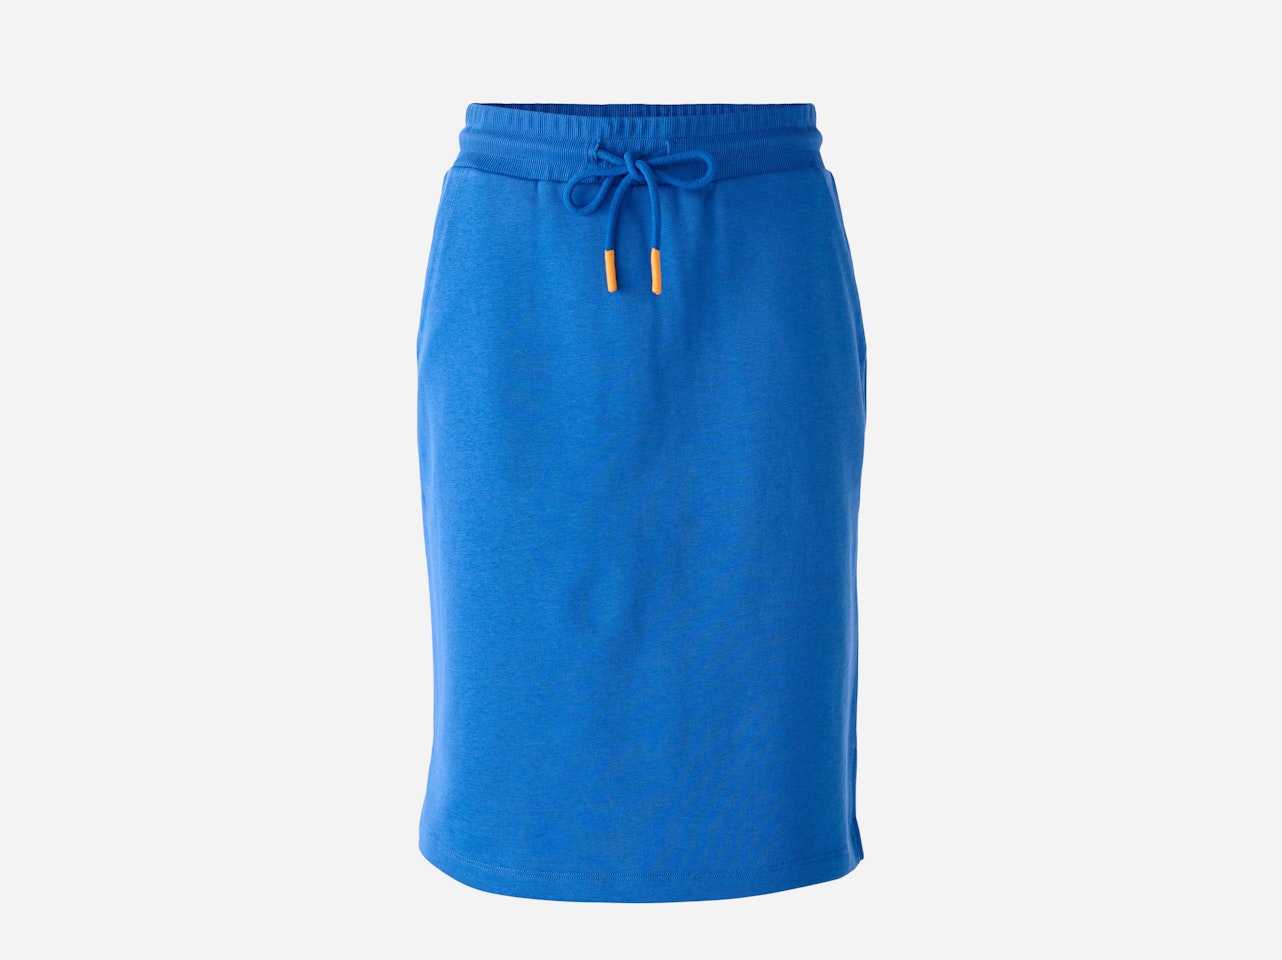 Bild 1 von Sweat skirt with pockets and small slits in blue lolite | Oui